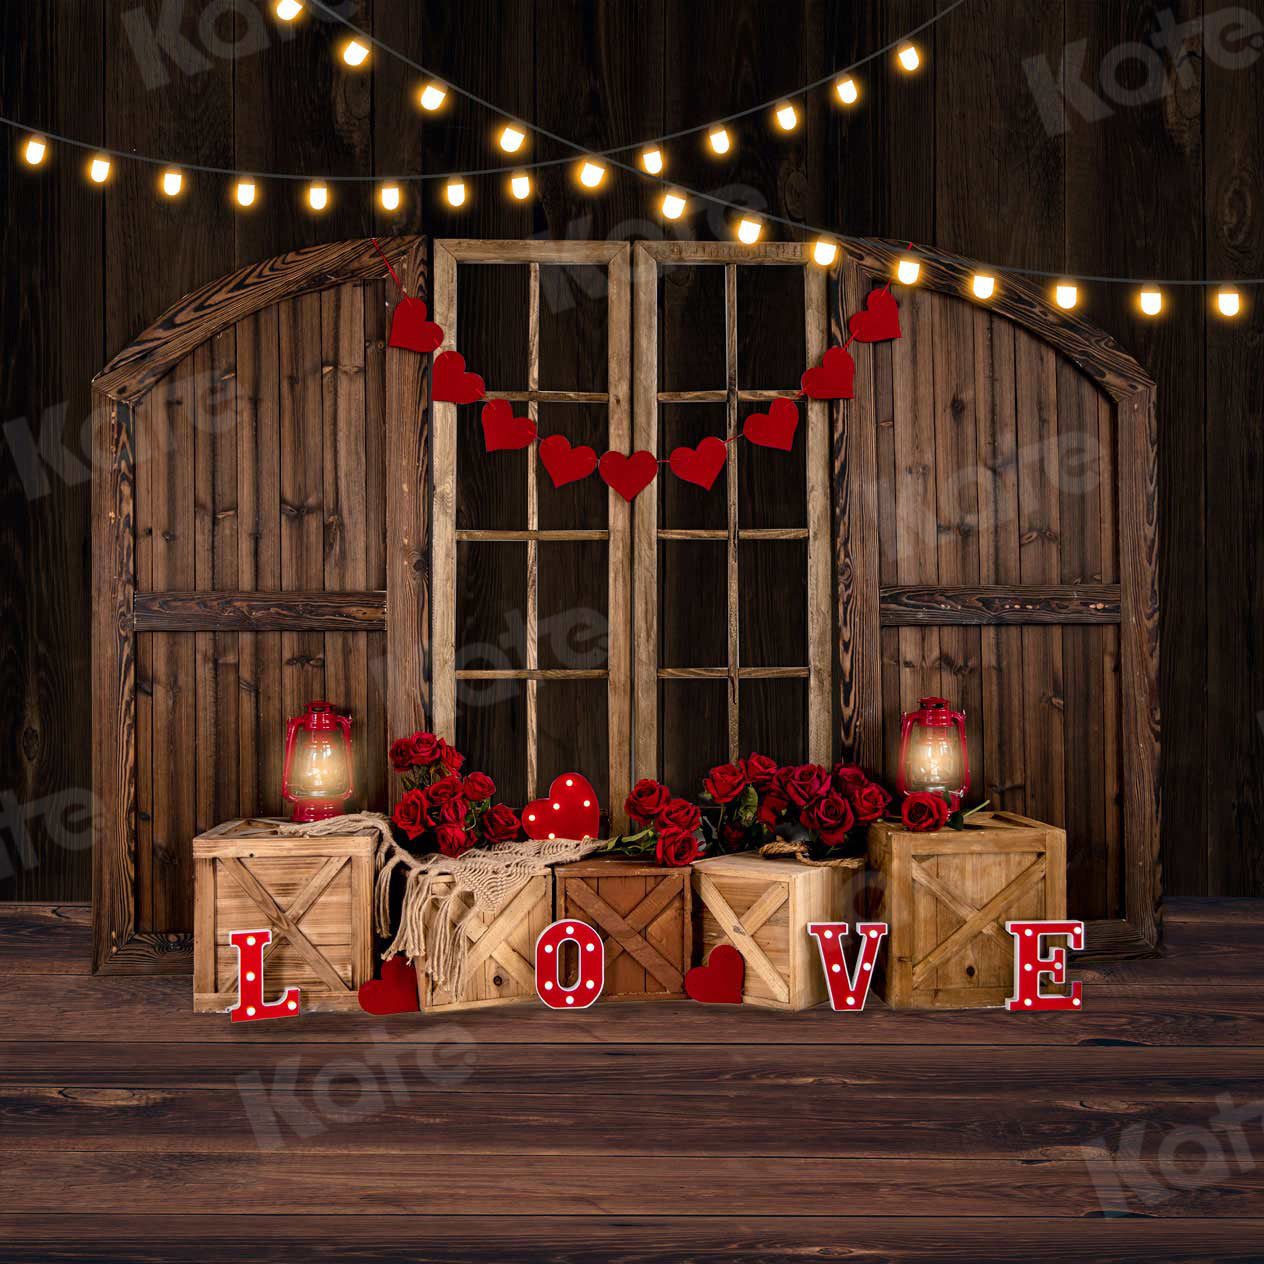 Kate Valentine's Day Backdrop Wooden Door Small Lamp Rose for Photography